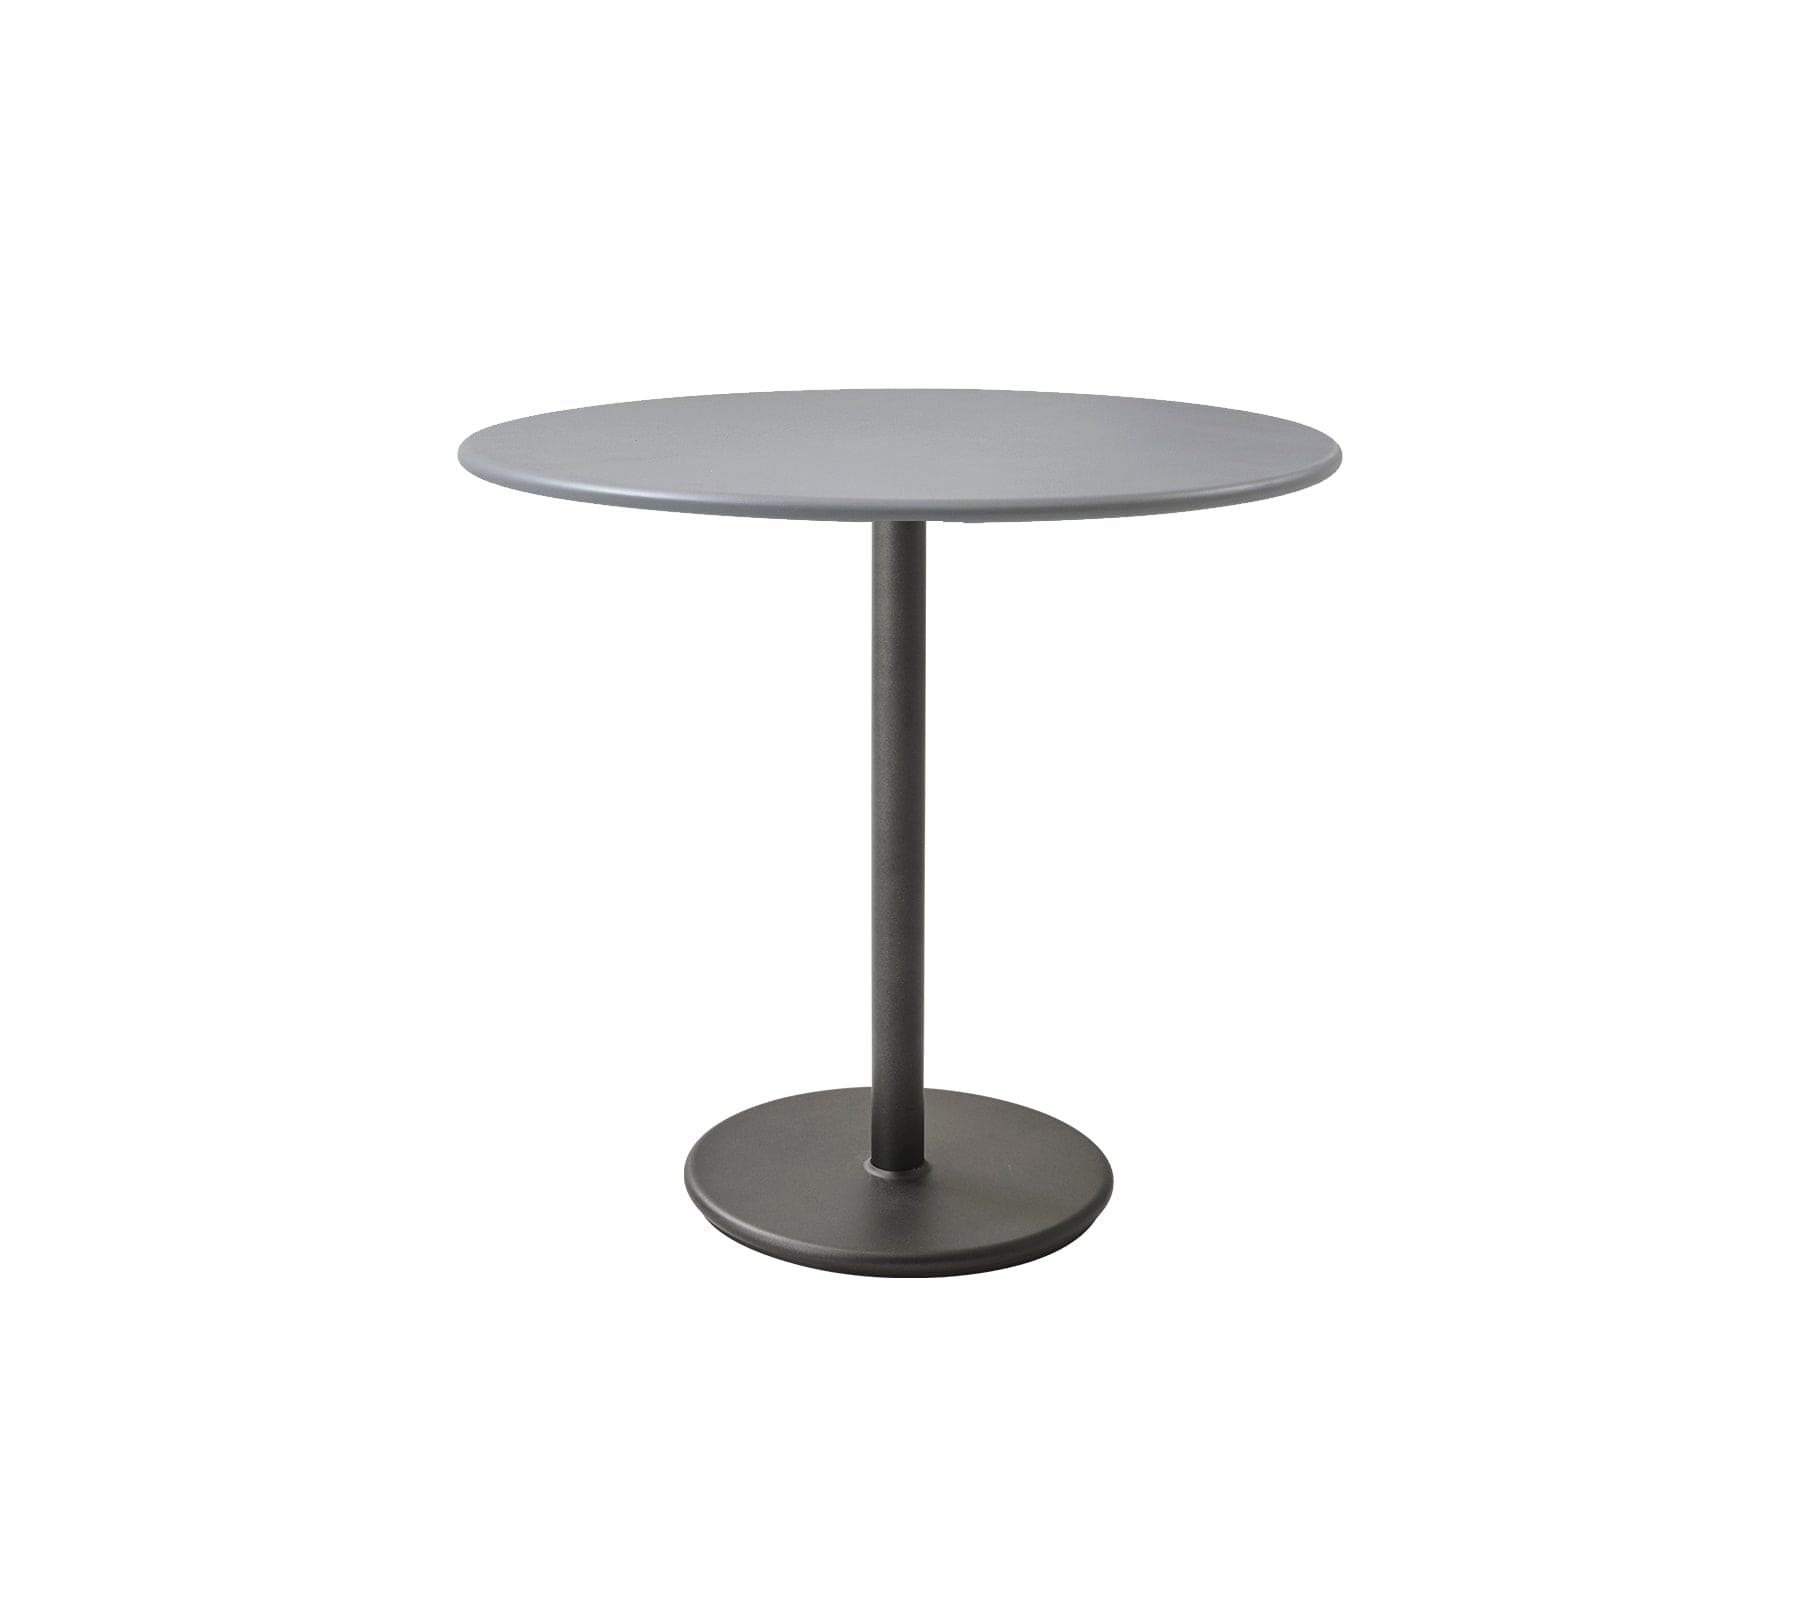 Boxhill's Go Outdoor Round Cafe Table Light Grey Aluminum Top